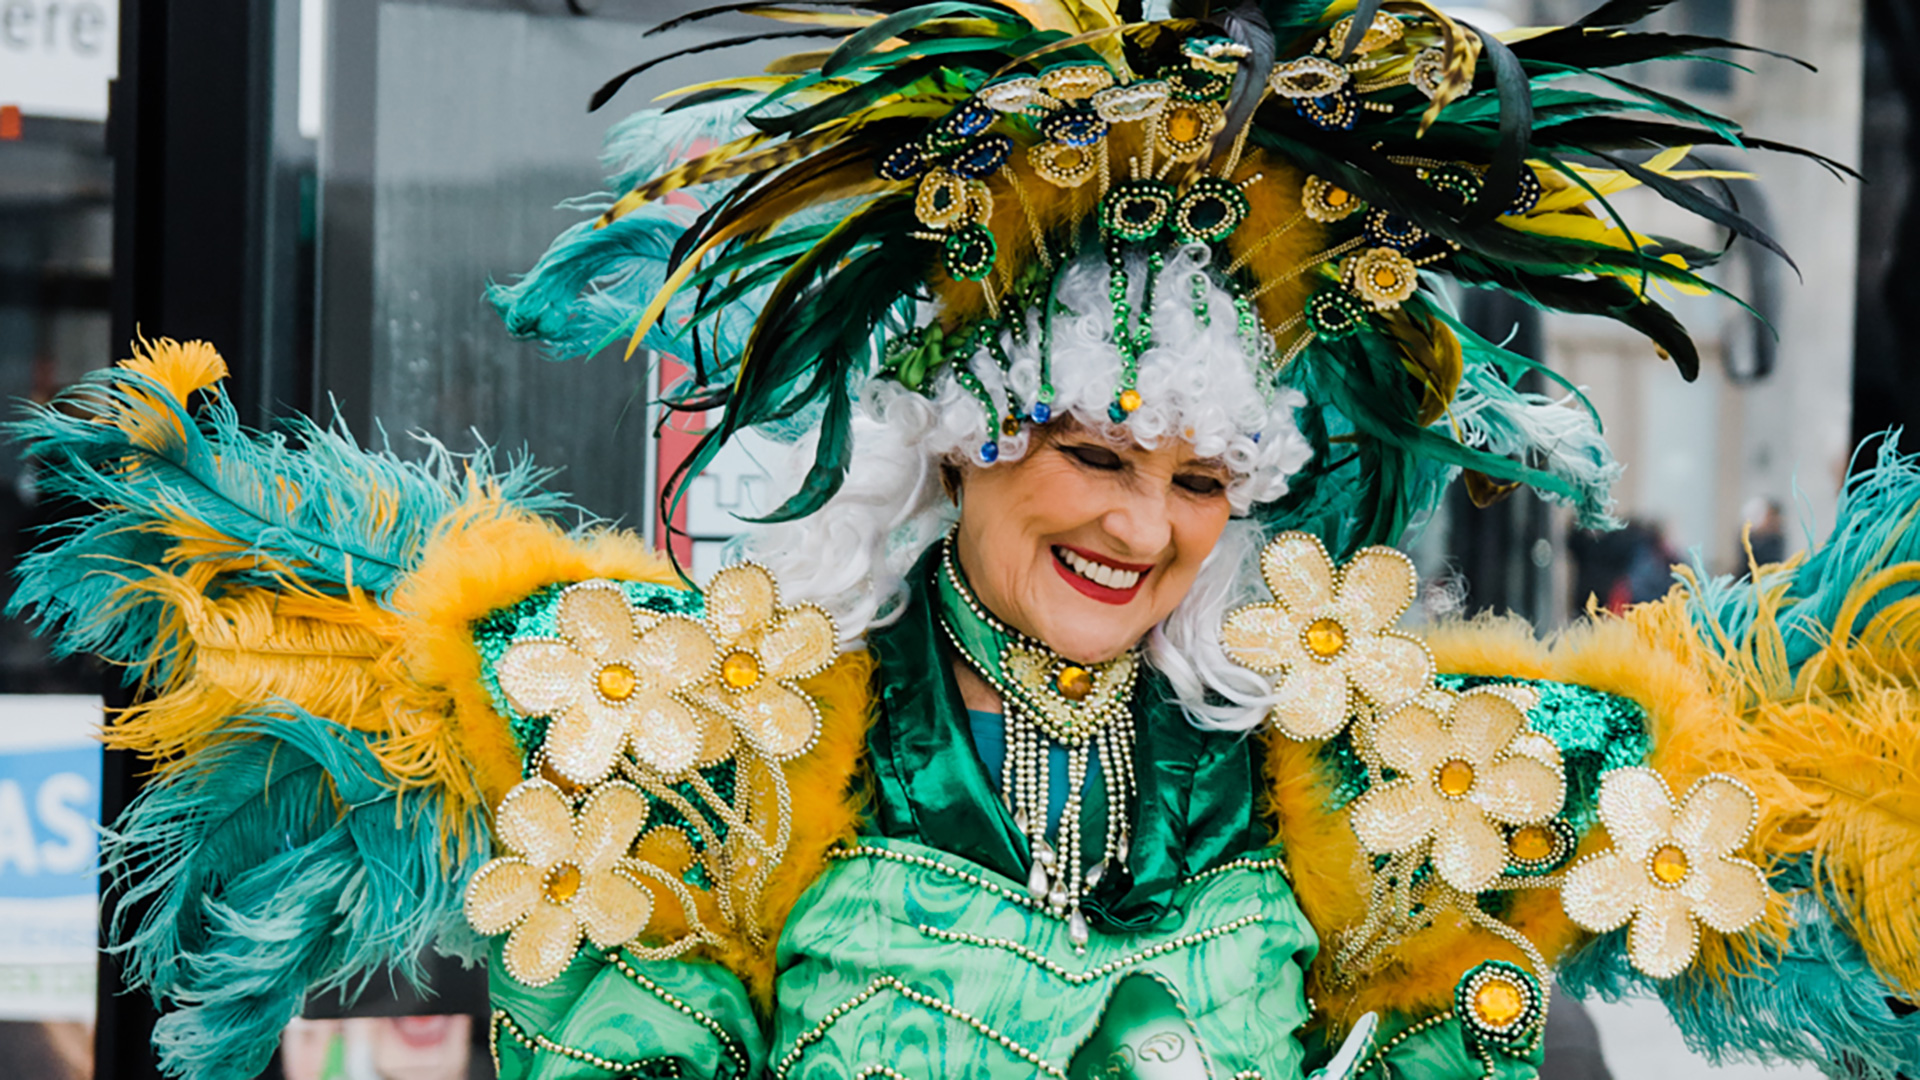 A woman in an elaborate green and gold costume. 